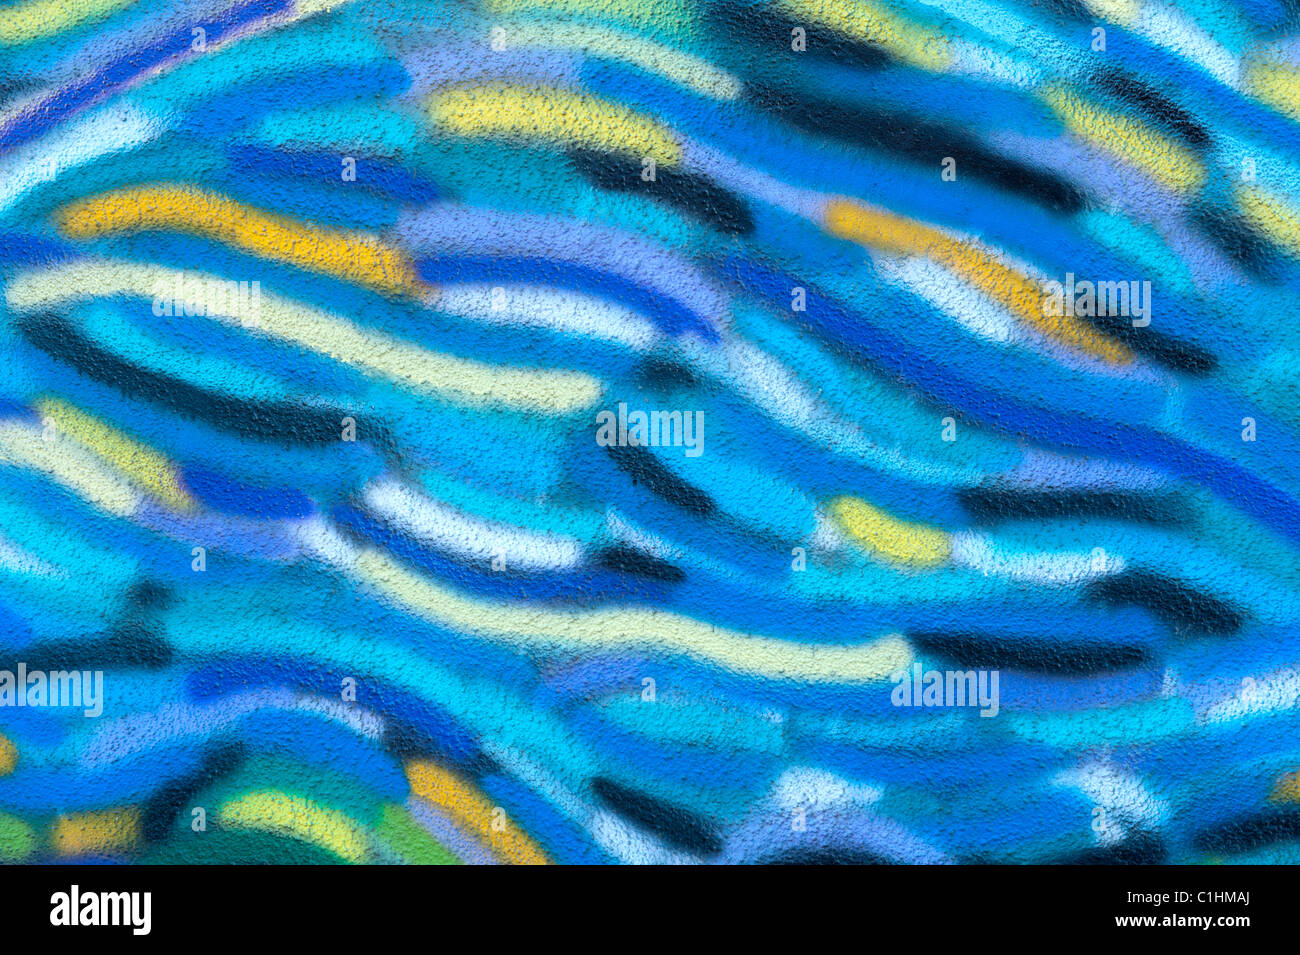 A close up of a colorful stucco wall for use as a design element or background. Stock Photo